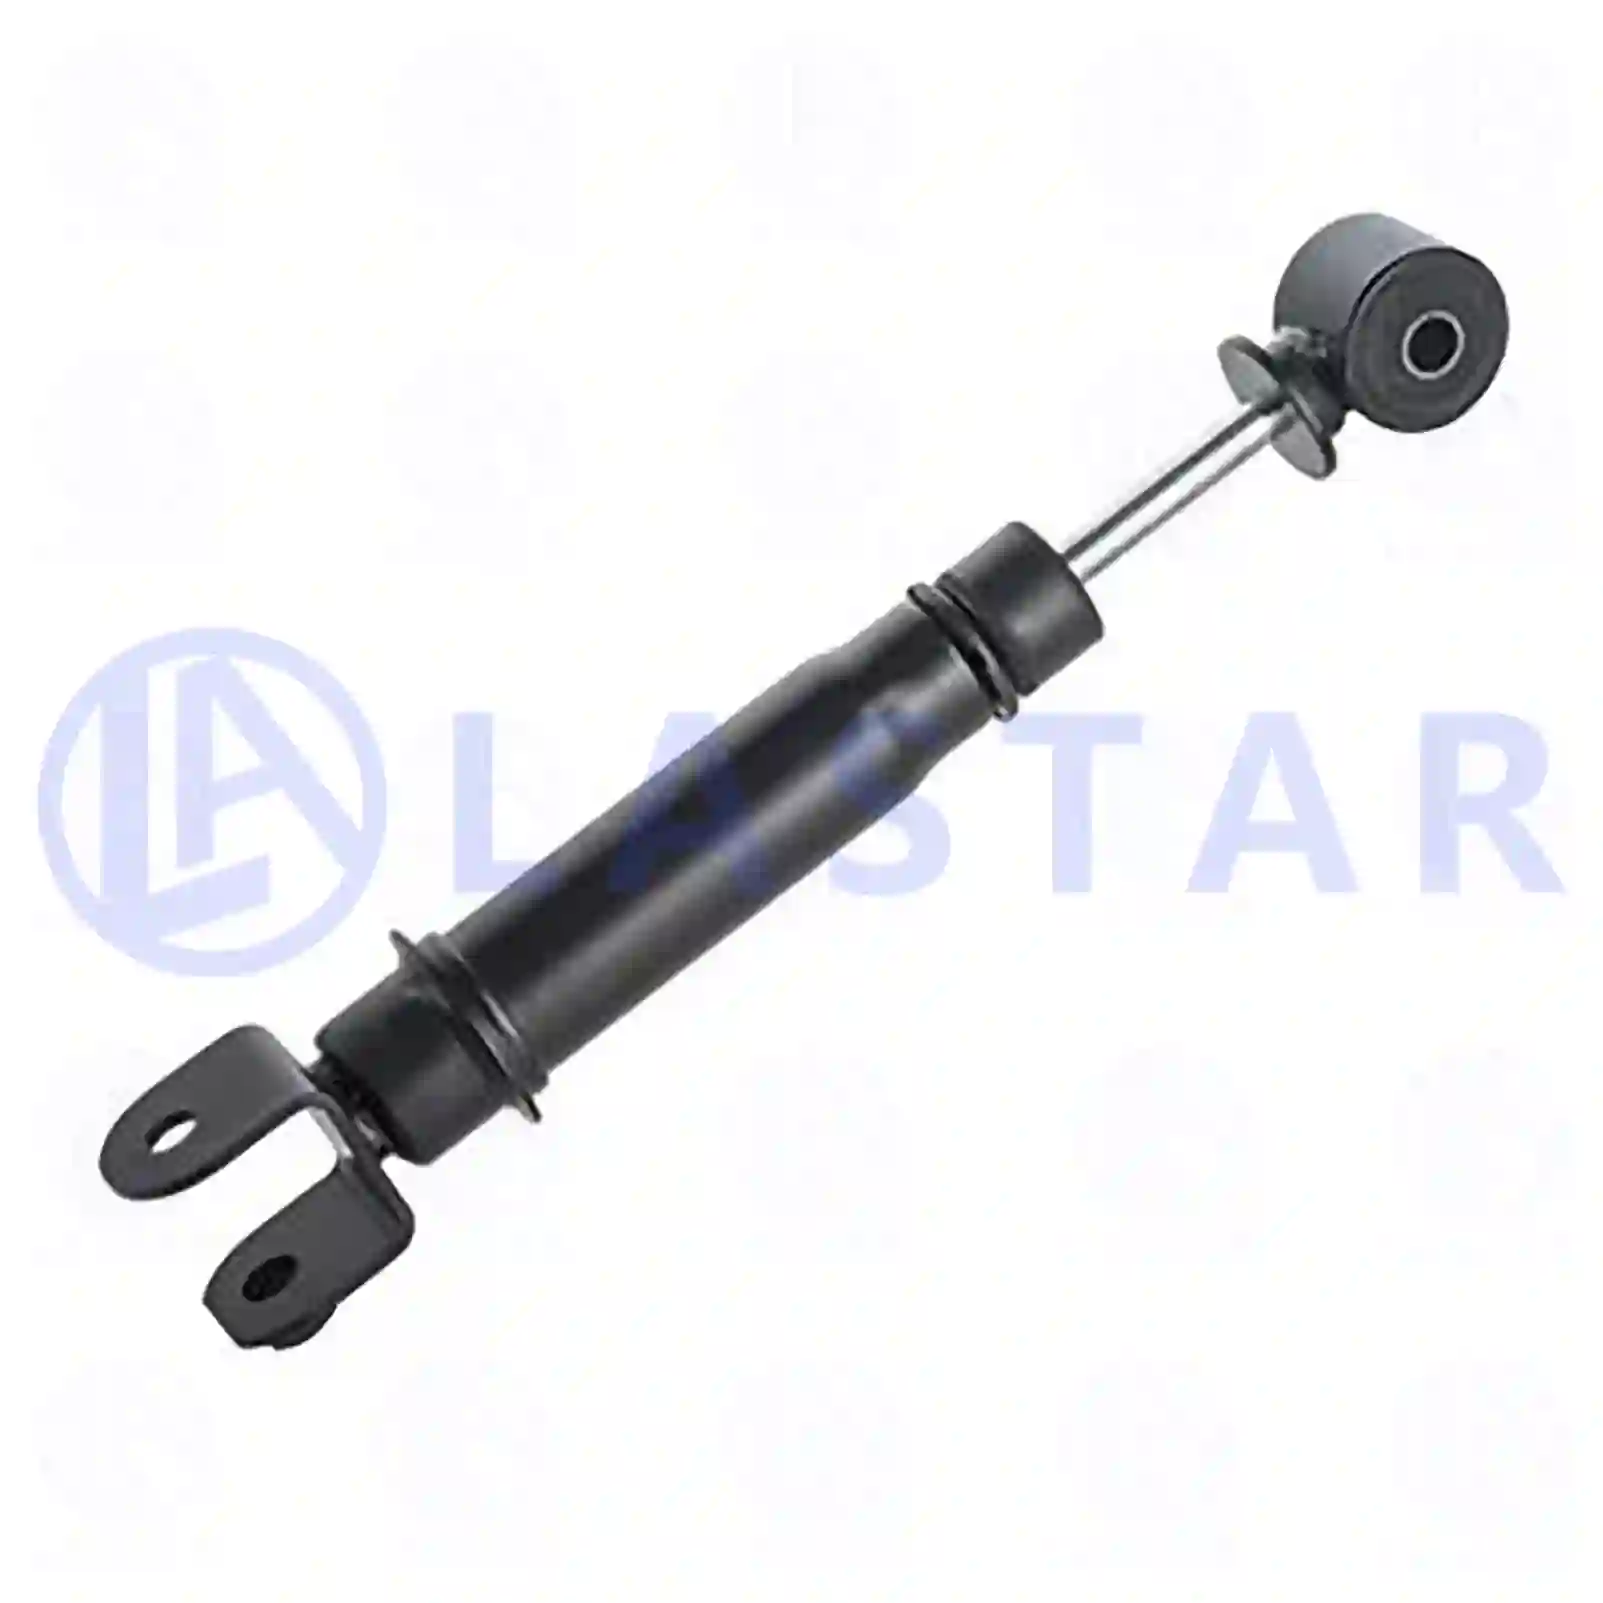  Cabin shock absorber, with bushing || Lastar Spare Part | Truck Spare Parts, Auotomotive Spare Parts